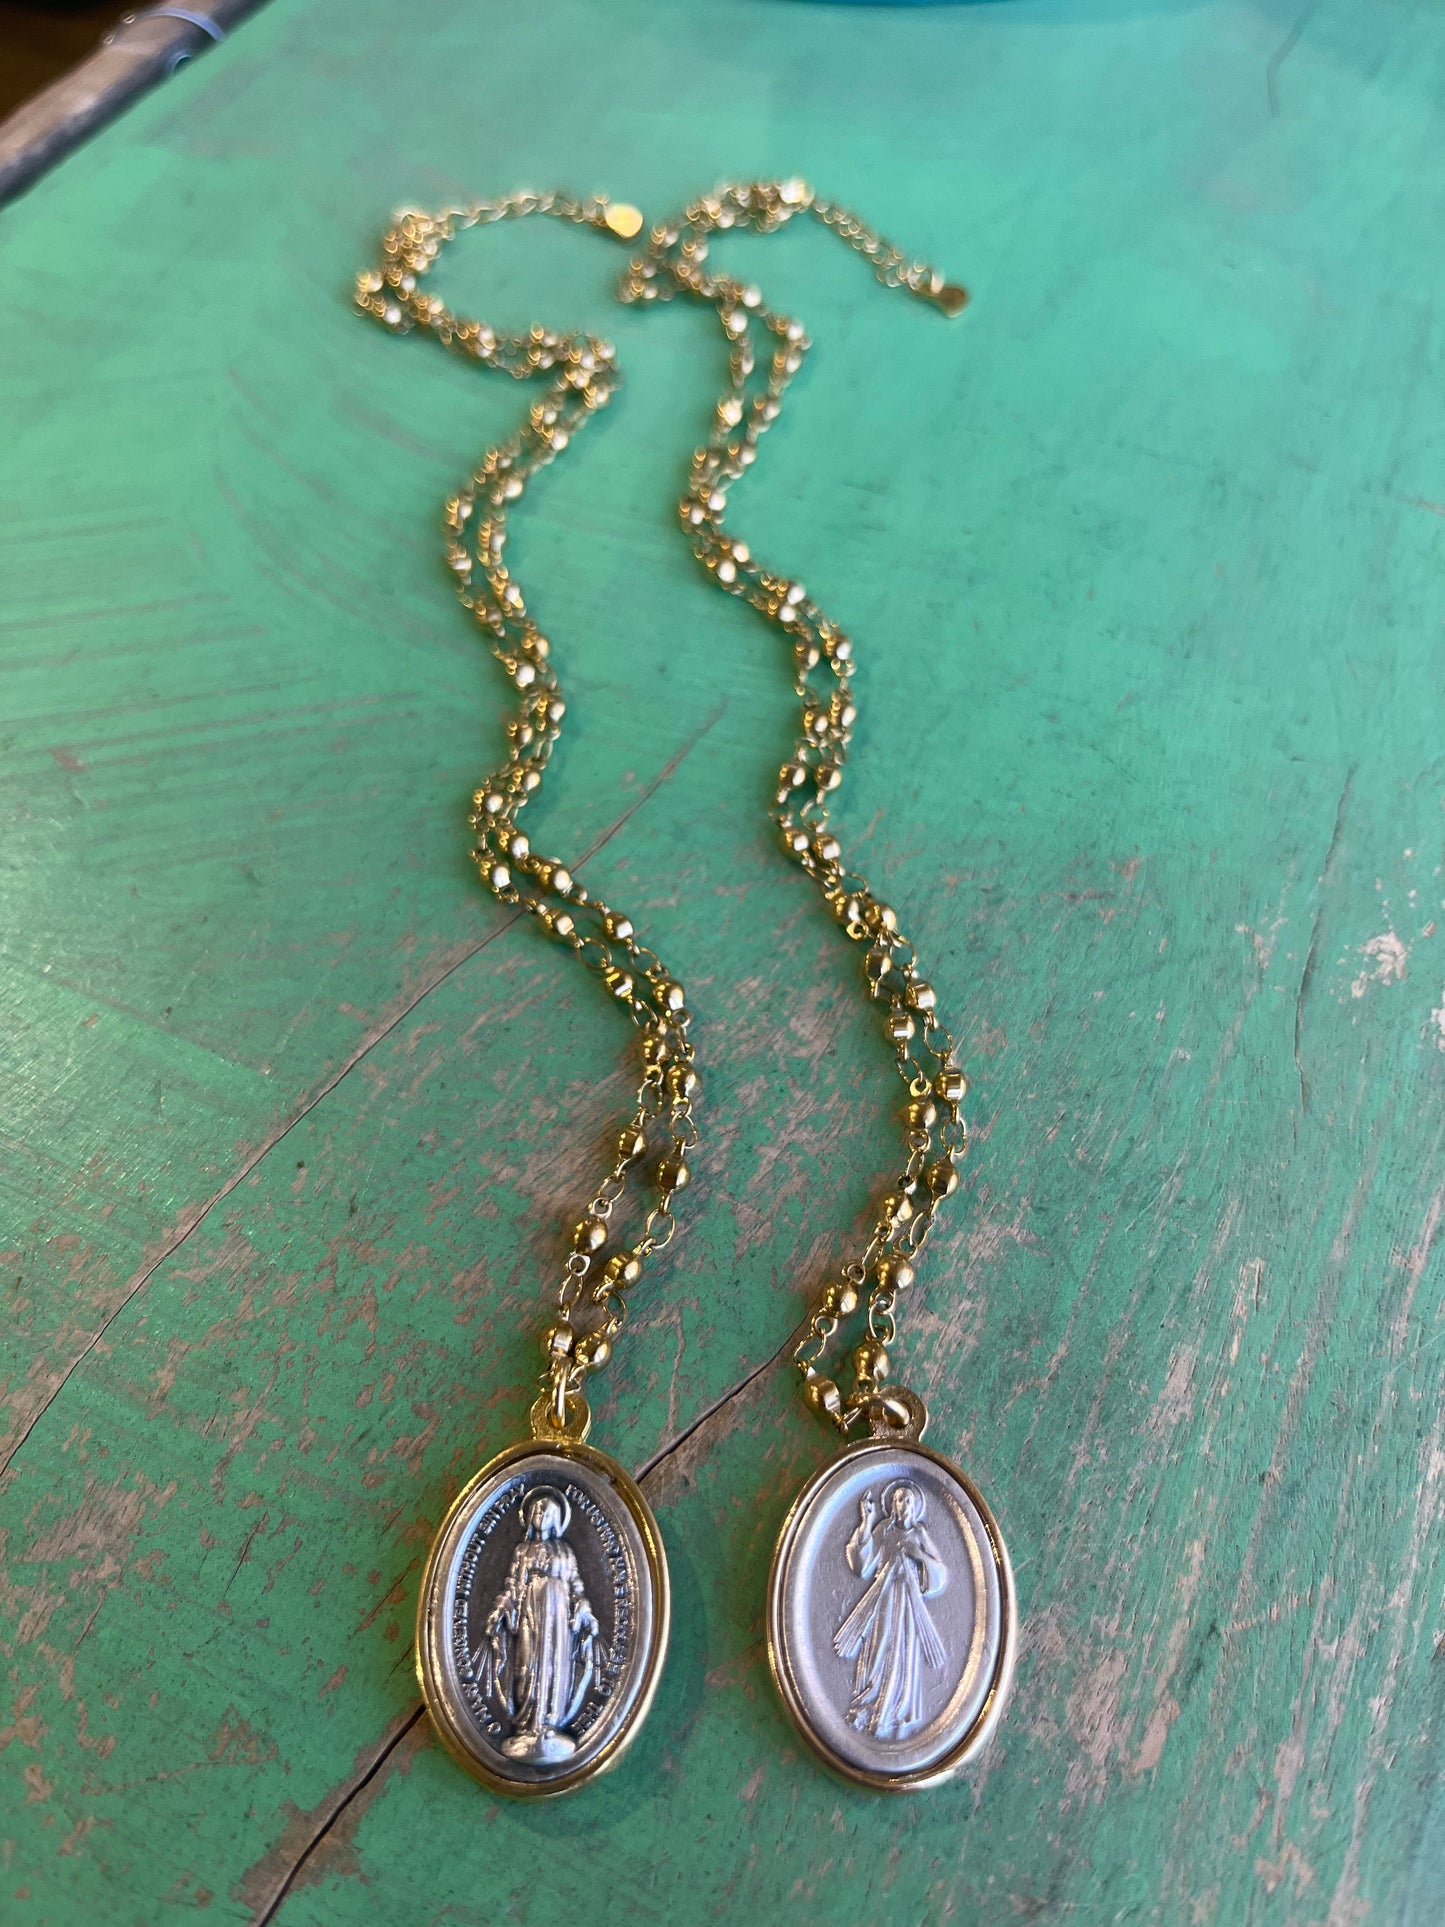 Miraculous Medal or Divine Mercy Necklace